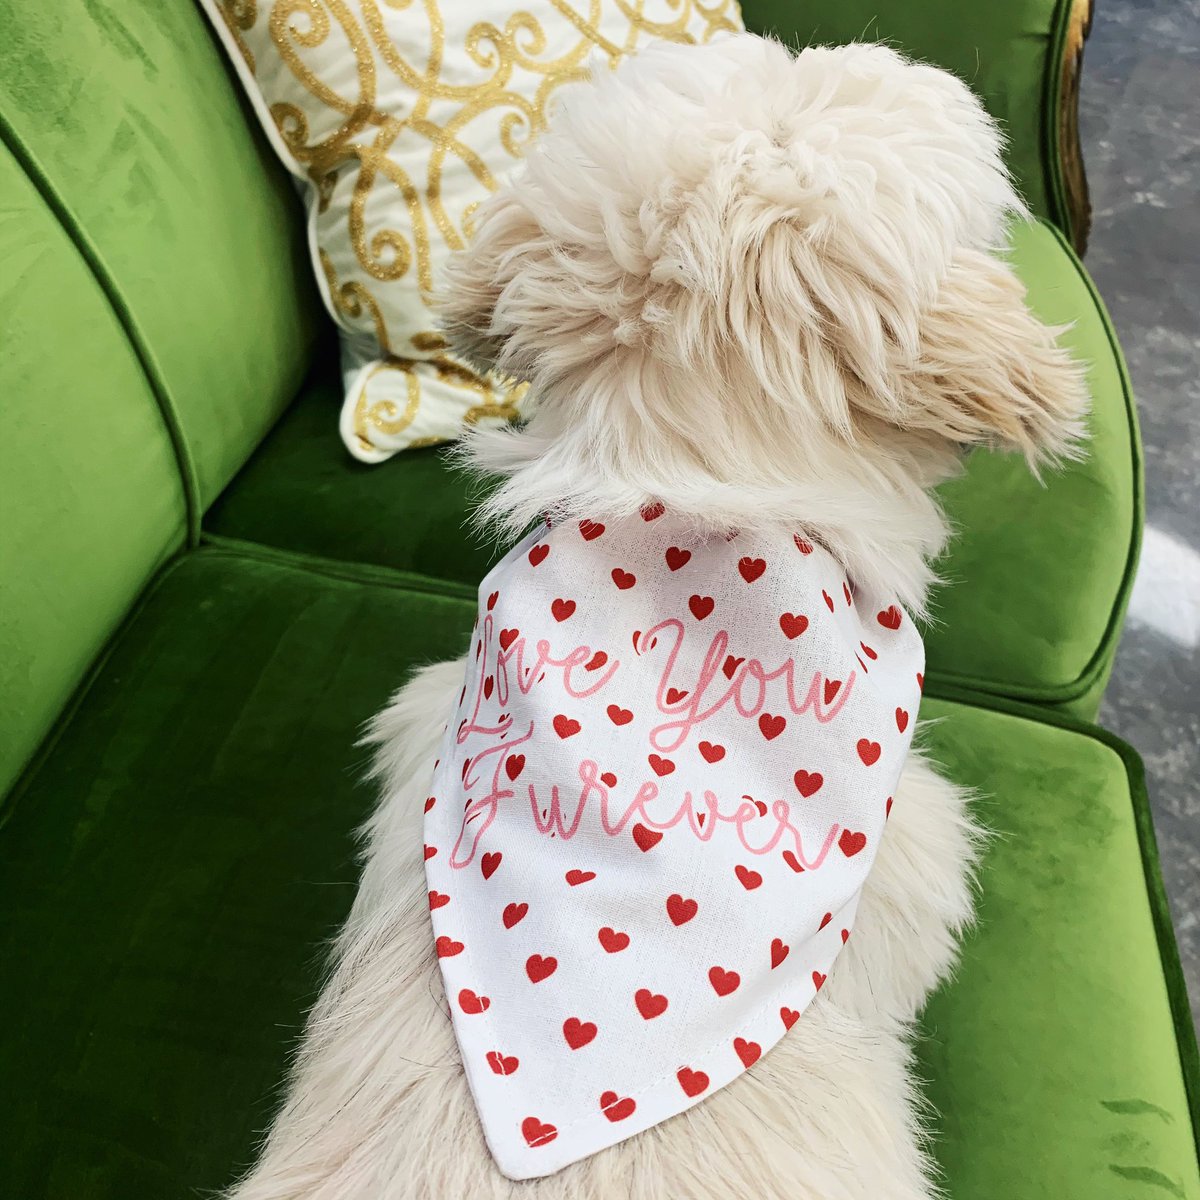 The perfect doggy bandana for Valentines Day 🥰❤️ Dogs> Dudes... am I right?🤪🤷🏼‍♀️🤣 #dogsofinstagram #dogbandana #valentinebandana #saintspup #saintsboutiquedport #saintsboutique #dogstyle